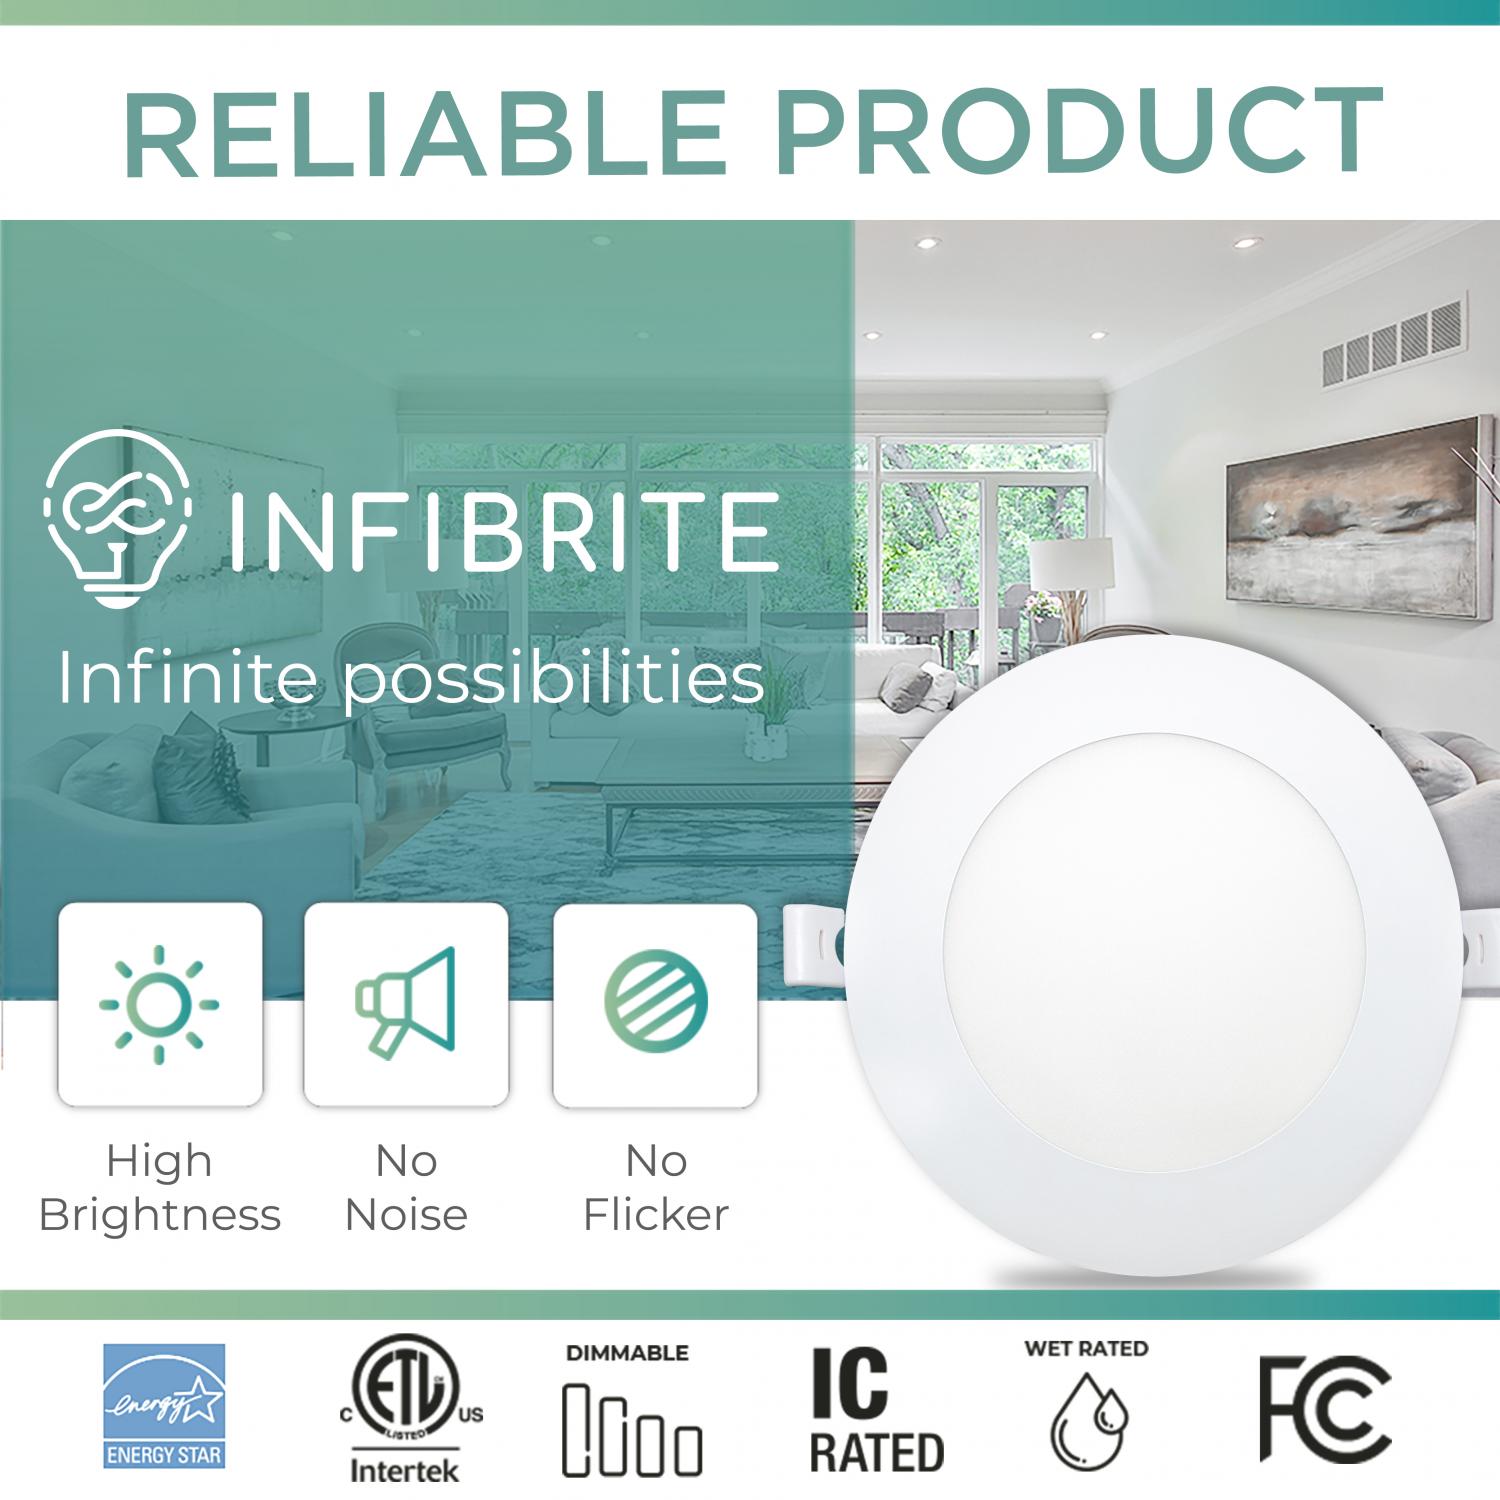 Infibrite 4 Inch 5000K Daylight 9W 750 LM Ultra-Slim LED Ceiling Light with Junction Box, Flush Mount, Dimmable, Fixture for Bedroom, Wet Rated for Bathroom, Easy Install, 75W Eqv, ETL & Energy Star, US Company (12 Pack)